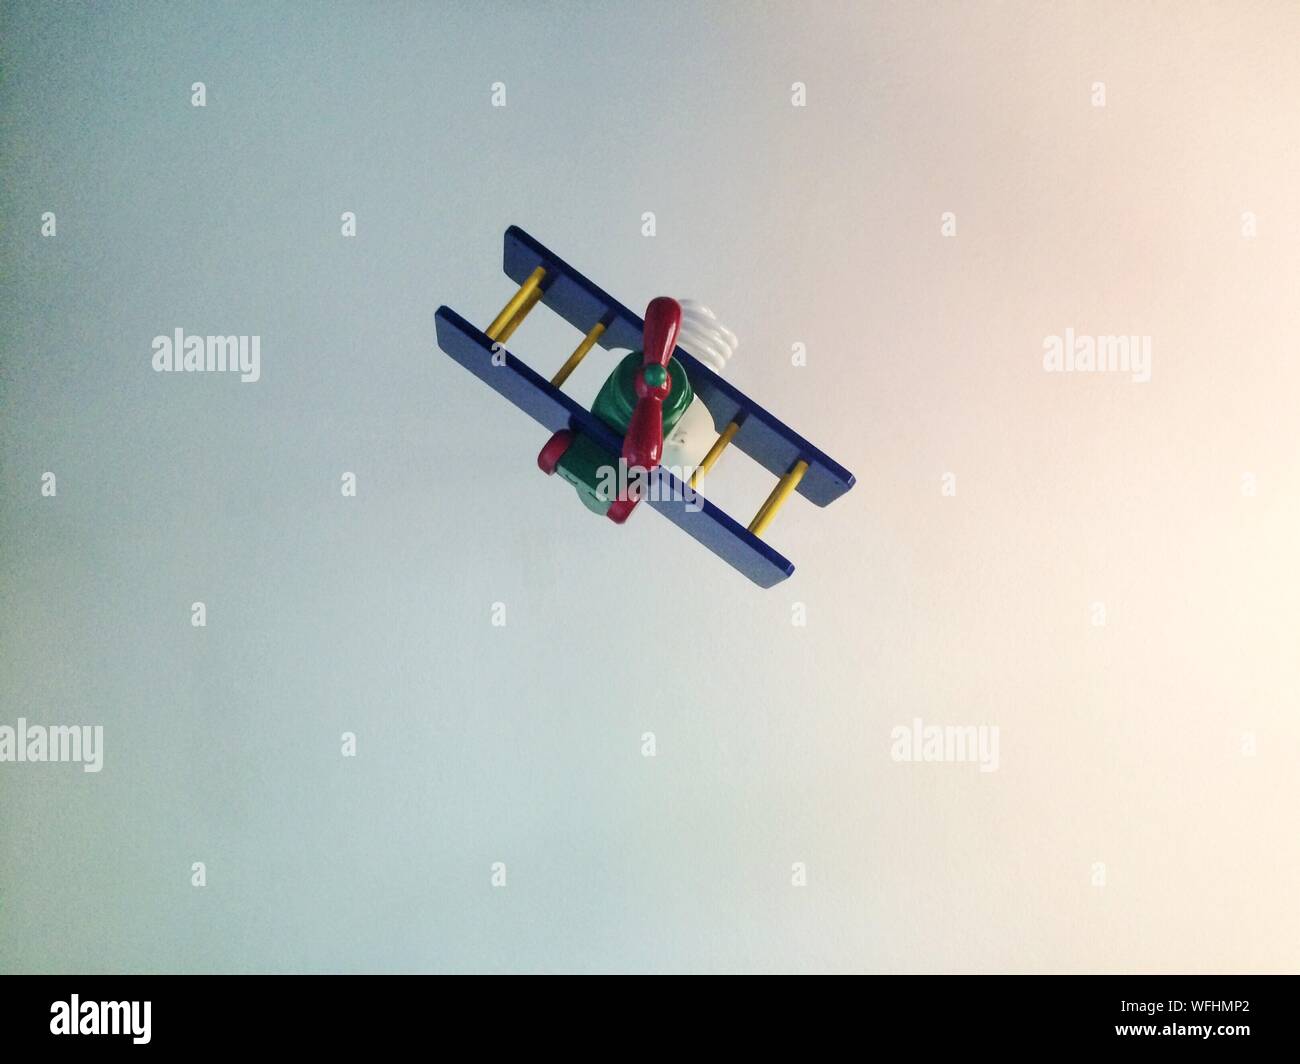 Low Angle View Of Toy Plane Flying Against Clear Sky Stock Photo